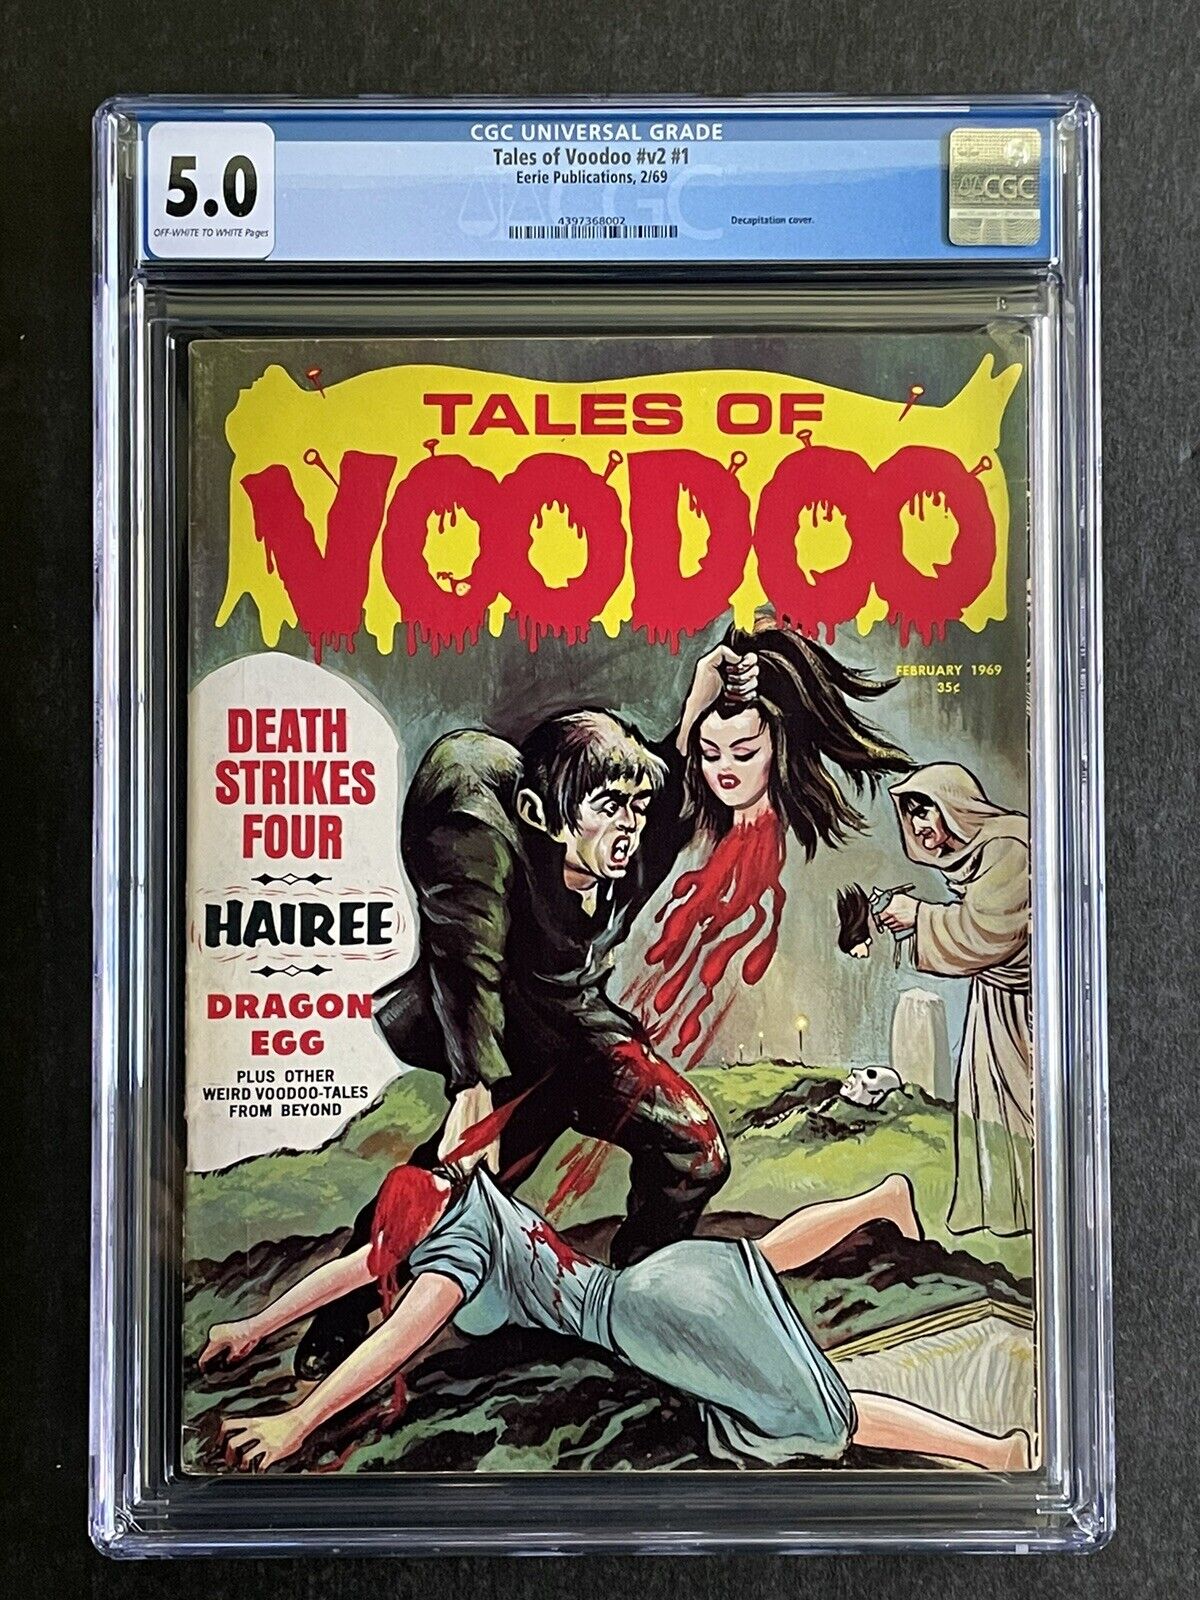 Eerie Publications Tales Of Voodoo CGC 5.0 #v2 #1 Decapitation Issue 2/69 Key